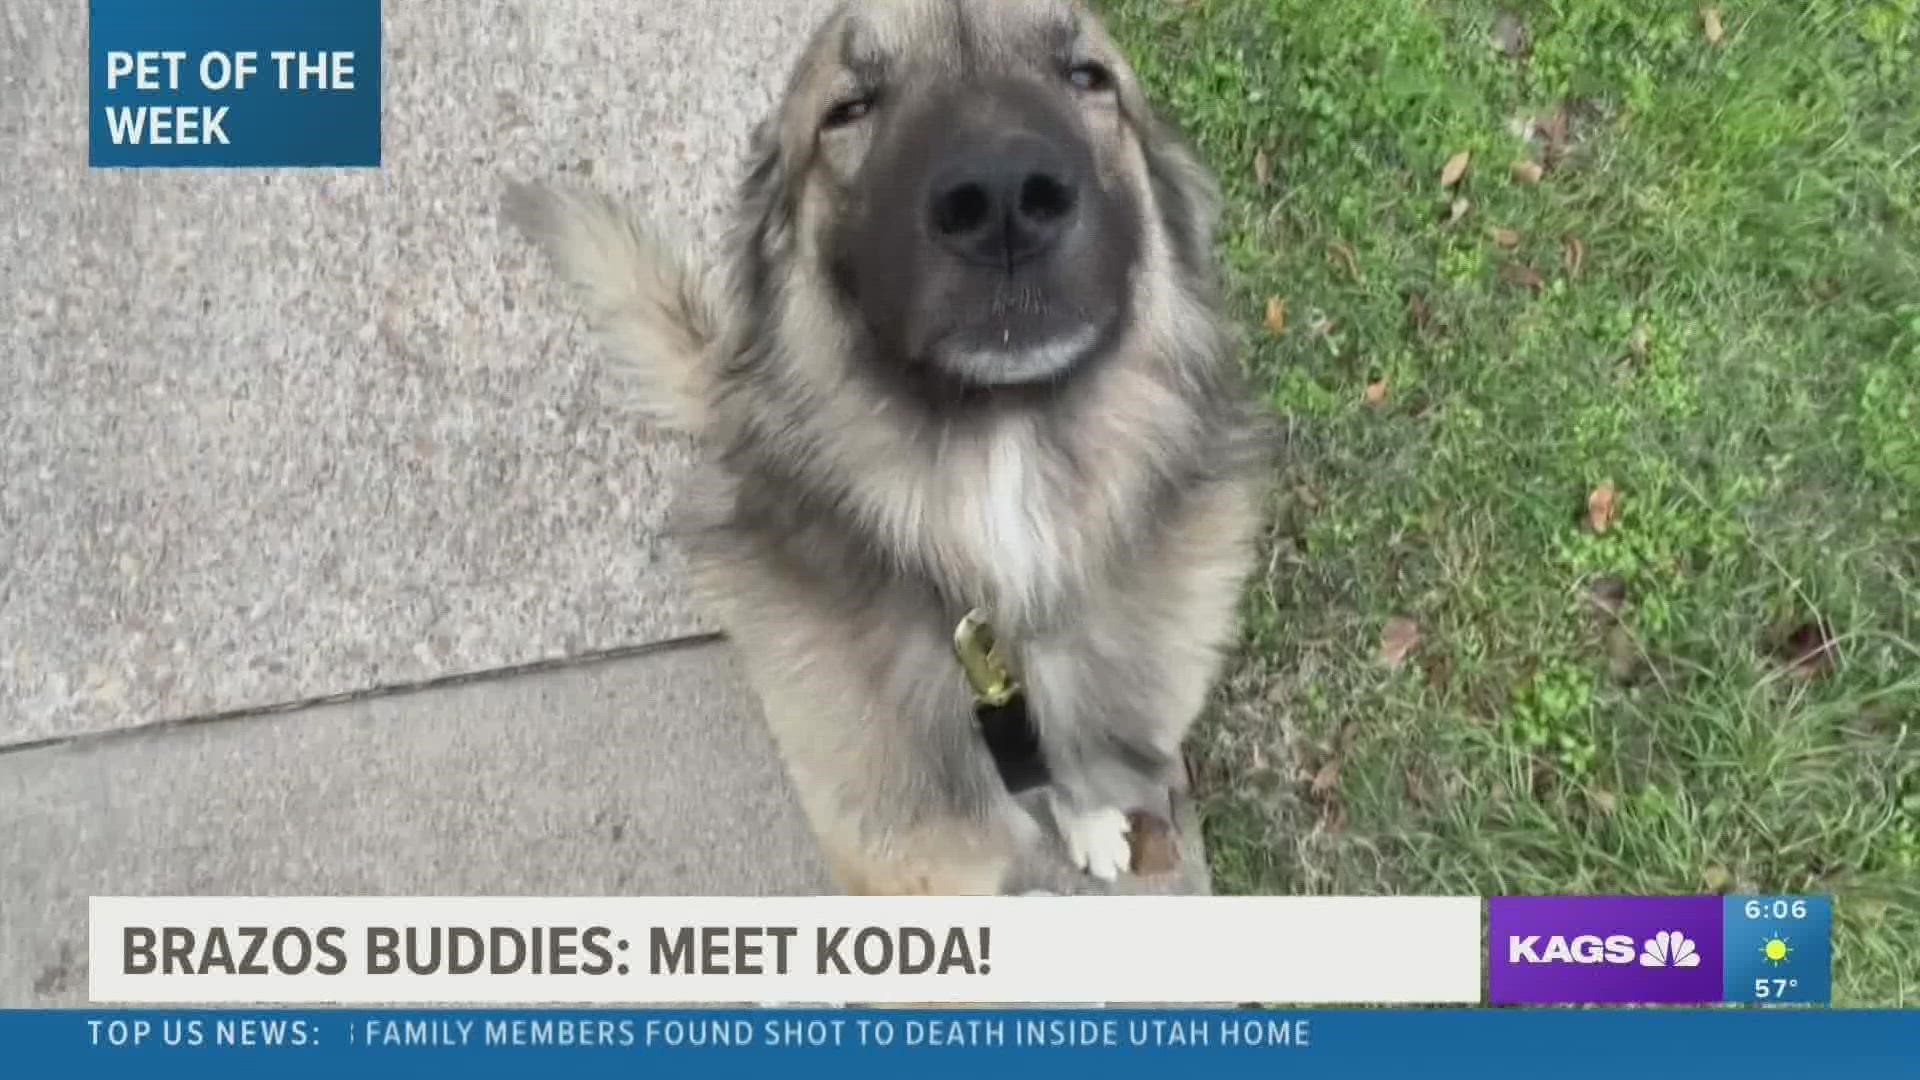 This week's featured Brazos Buddy is Koda, a five-year-old mixed breed dog that's looking to be adopted.